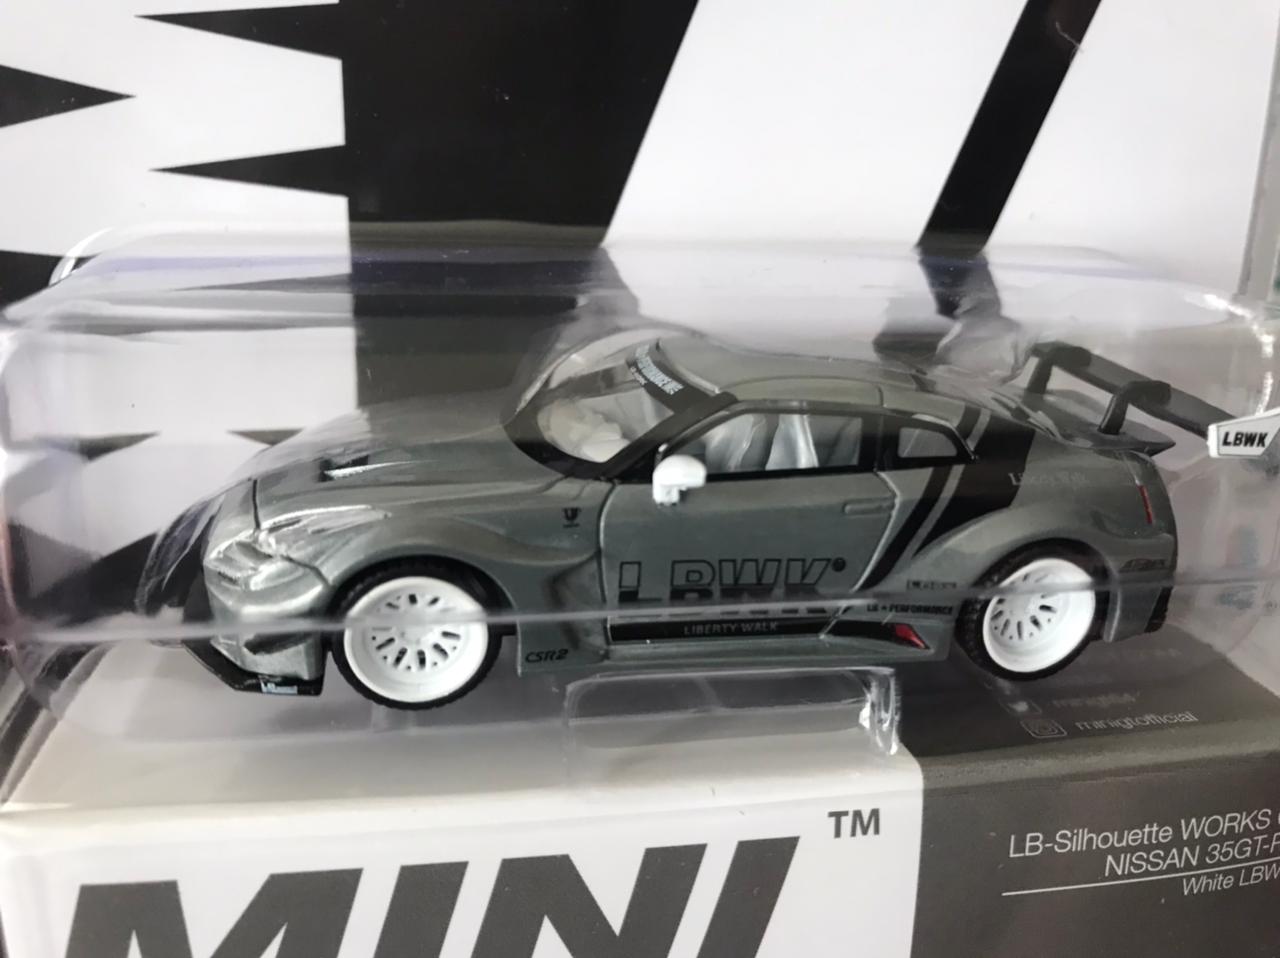 CHASE Mini GT Mijo Exclusive 209 LB Silhouette WORKS GT NISSAN 35GT-RR Ver. 2 White 1:64